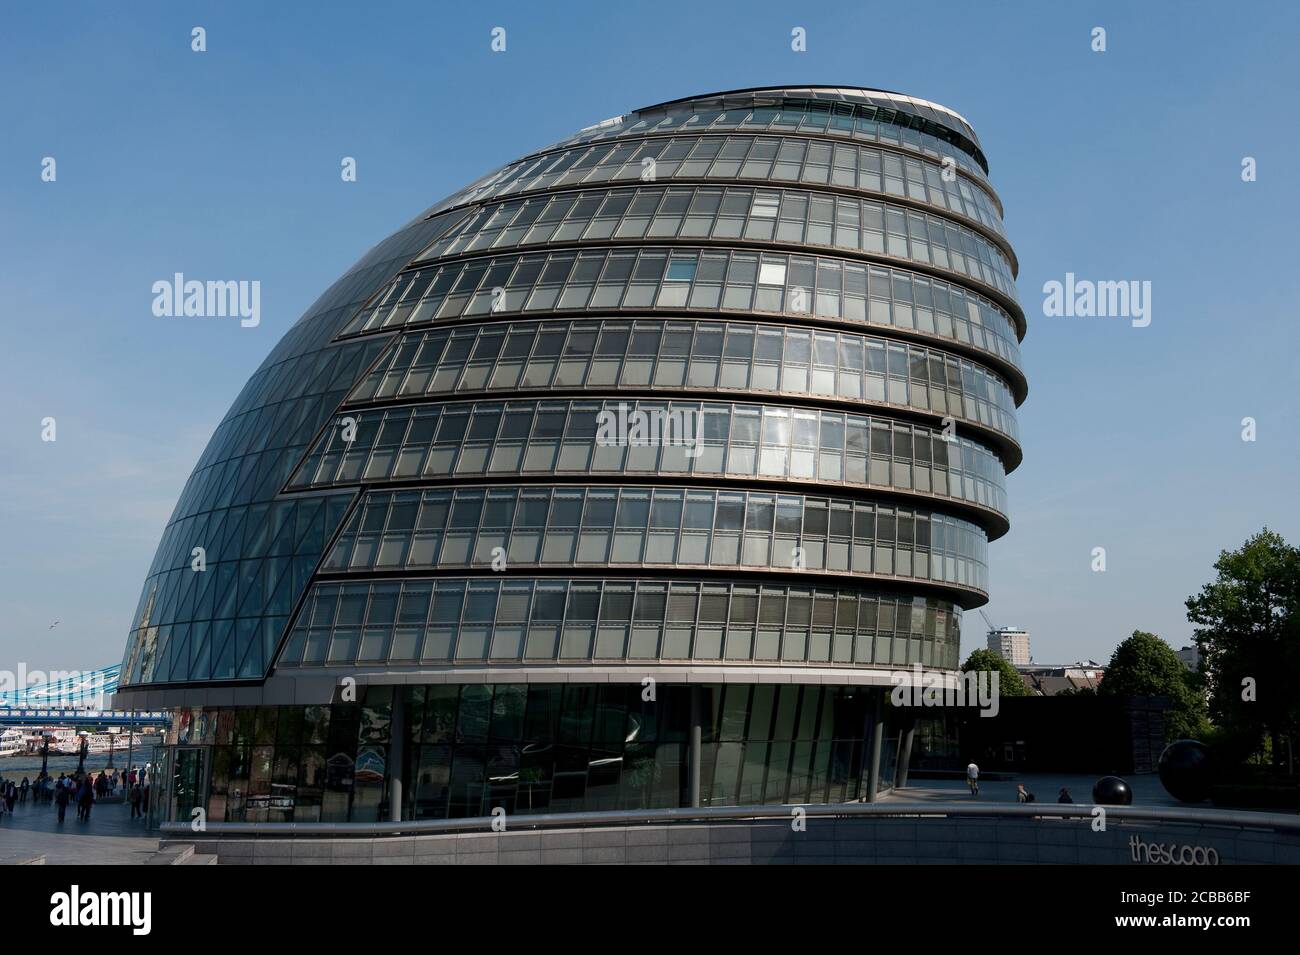 City Hall, the headquarters of the Greater London Authority in Southwark on the sourth bank of the River Thames, London, England. Stock Photo